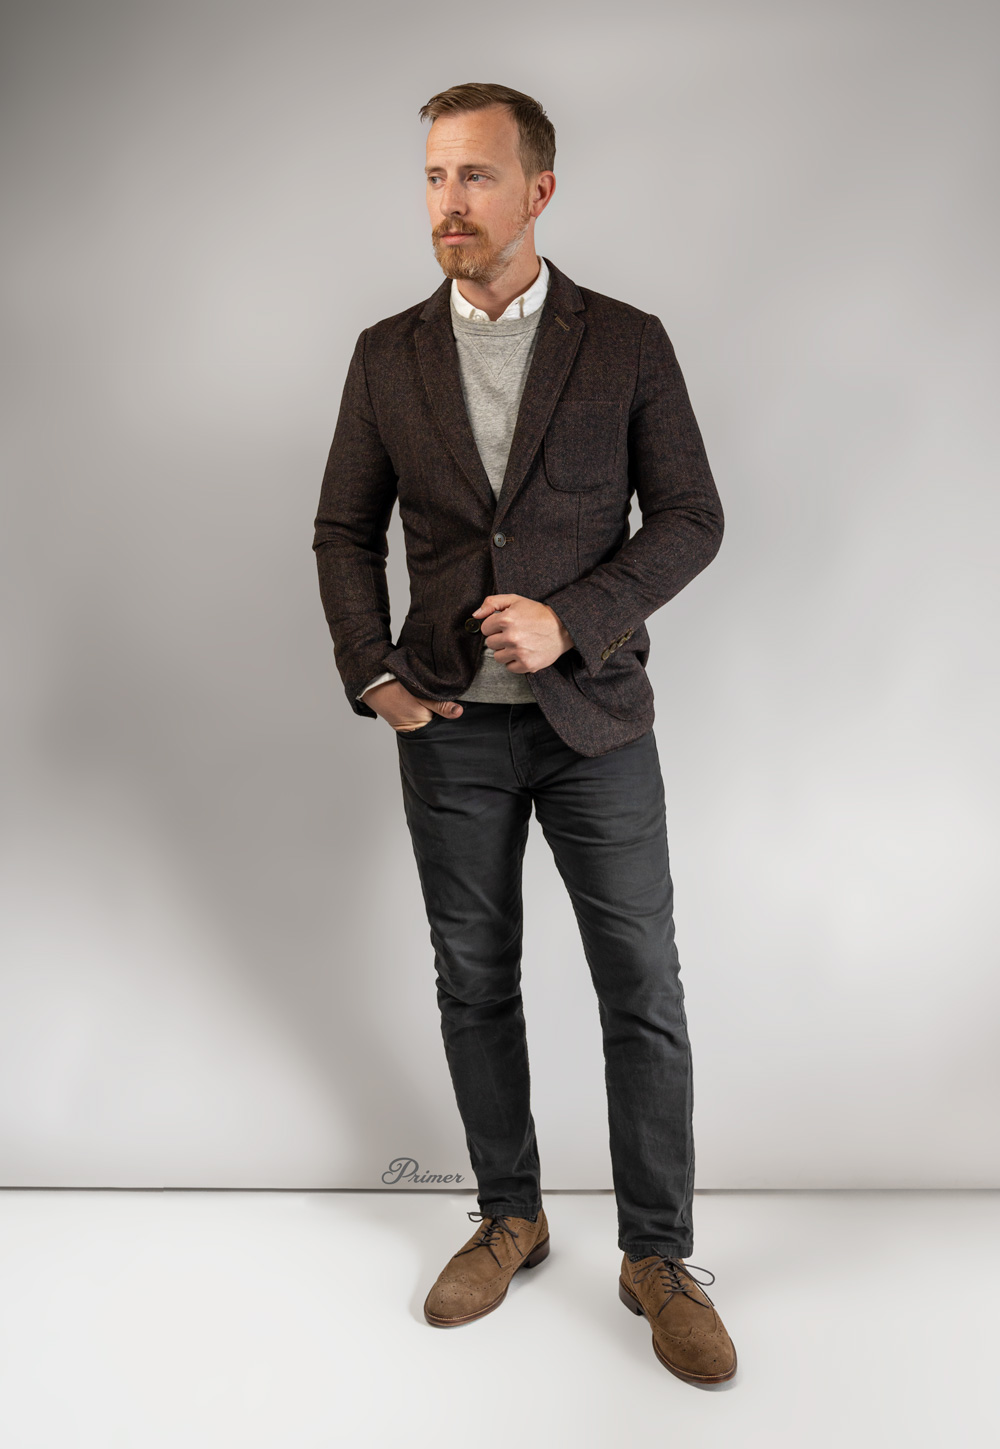 business casual outfit with brown blazer, white dress shirt, gray jeans, and suede wingtips